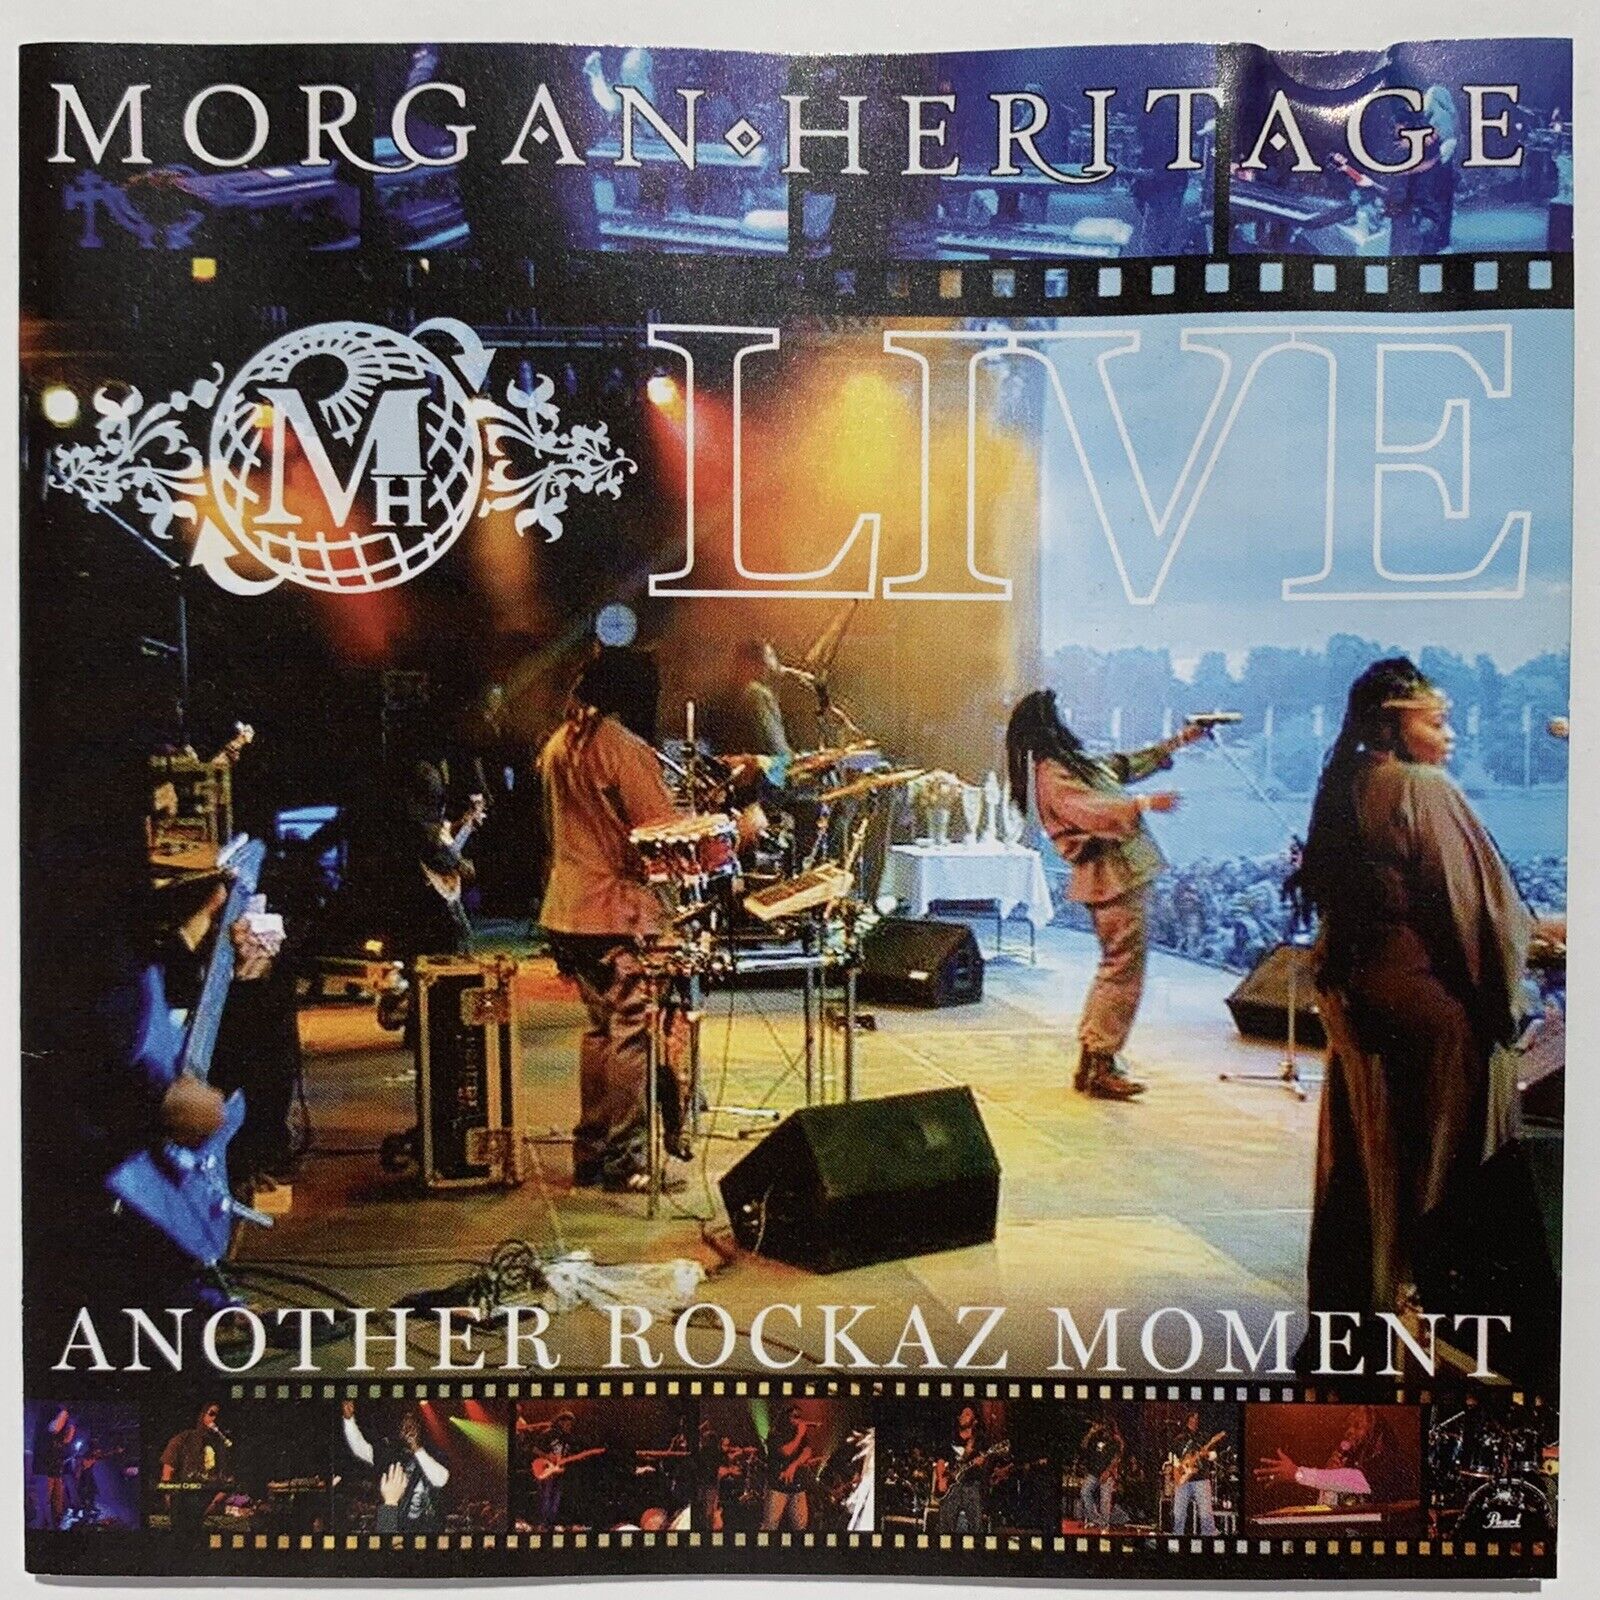 Live Another Rockaz Moment by Morgan Heritage CD 2006 VP Records 054645173520